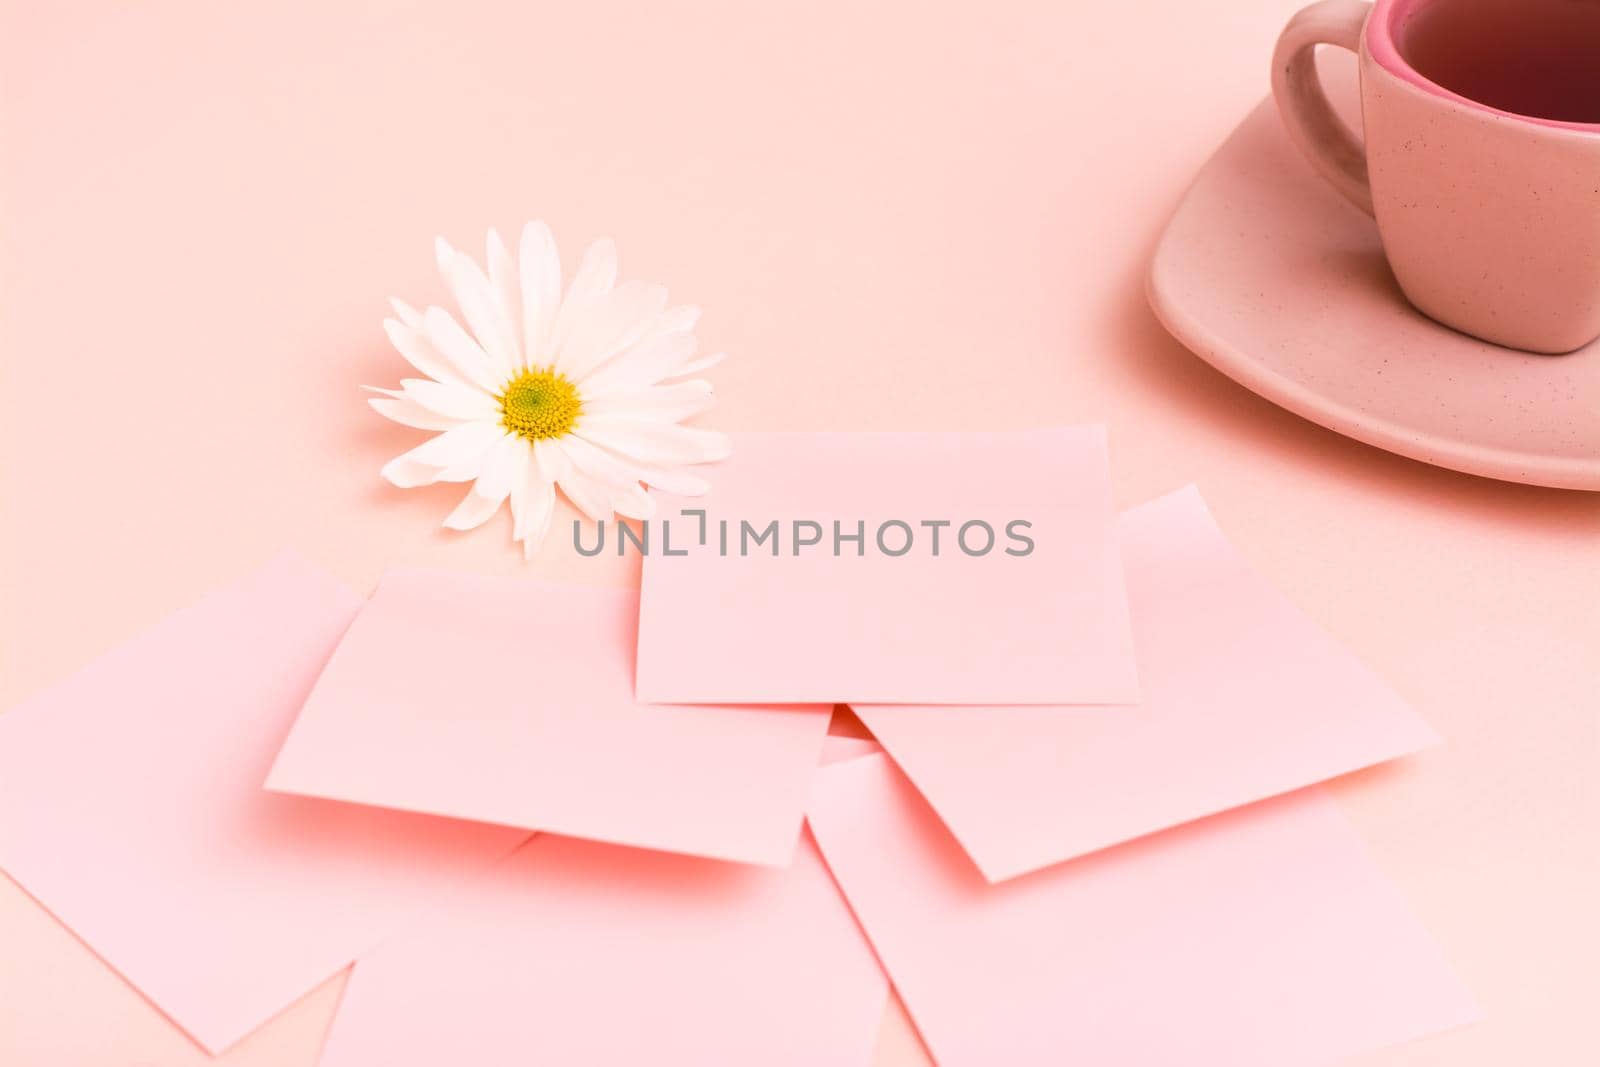 The concept is pink. A cup of coffee, sheets for writing, a pen and a chrysanthemum on a pink background.